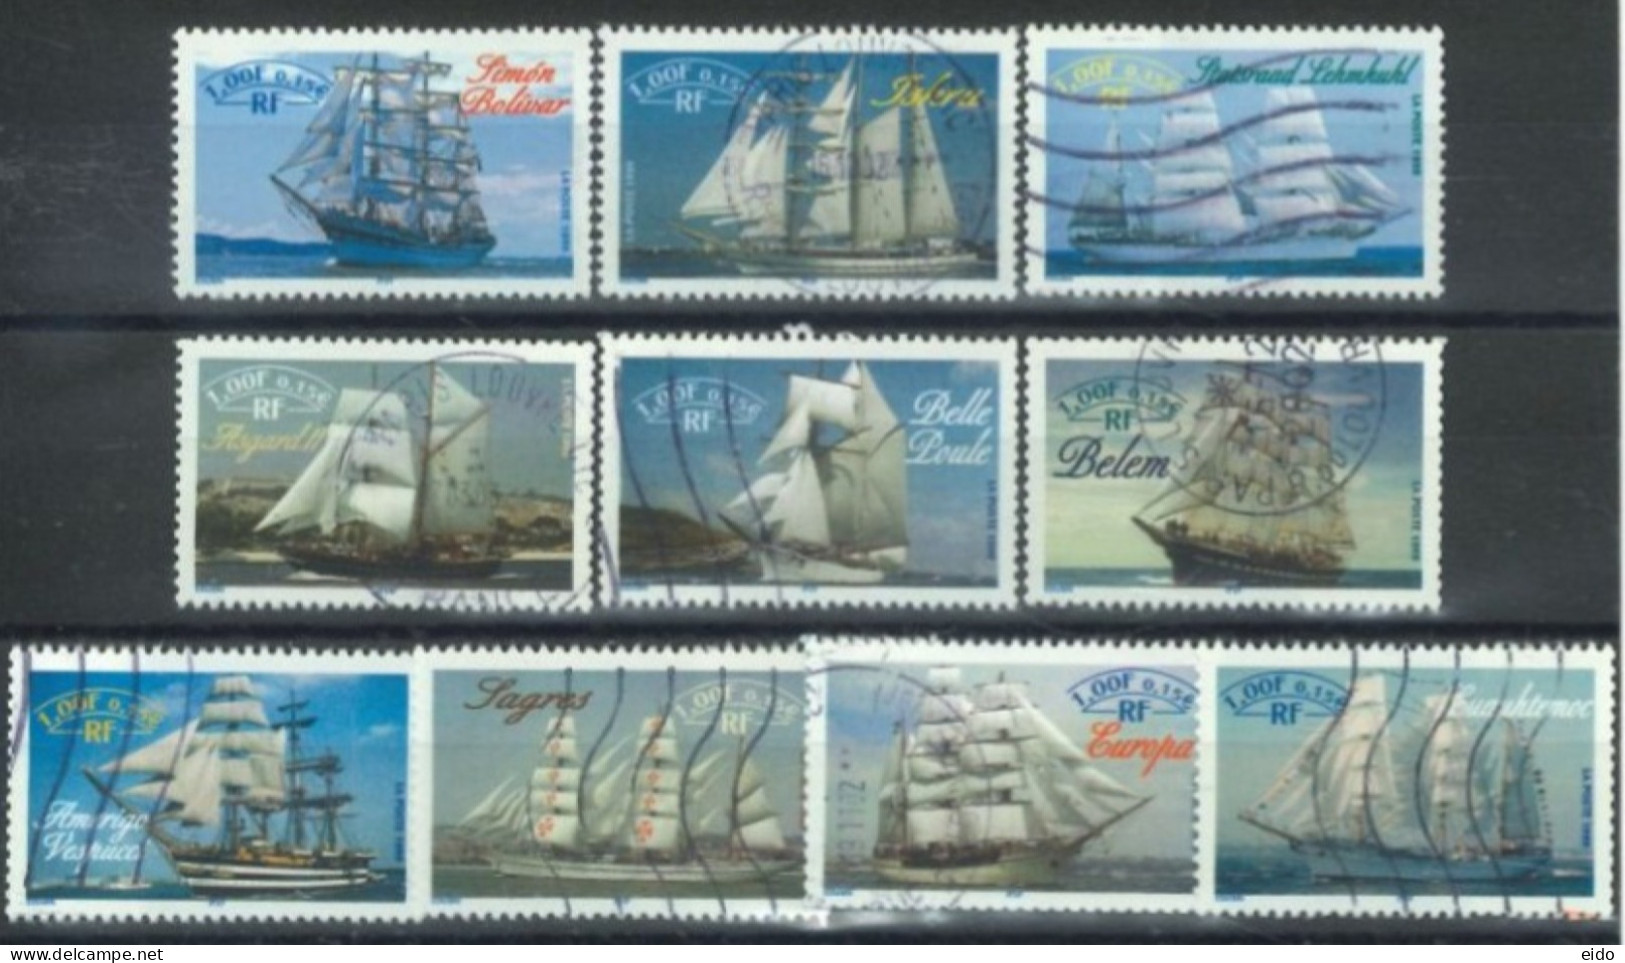 FRANCE -1999 - (YOUTH COLLECTION) ARMADA OF THE CENTURY STAMPS COMPLETE SET OF 10,  # 3269/78, USED - Usados